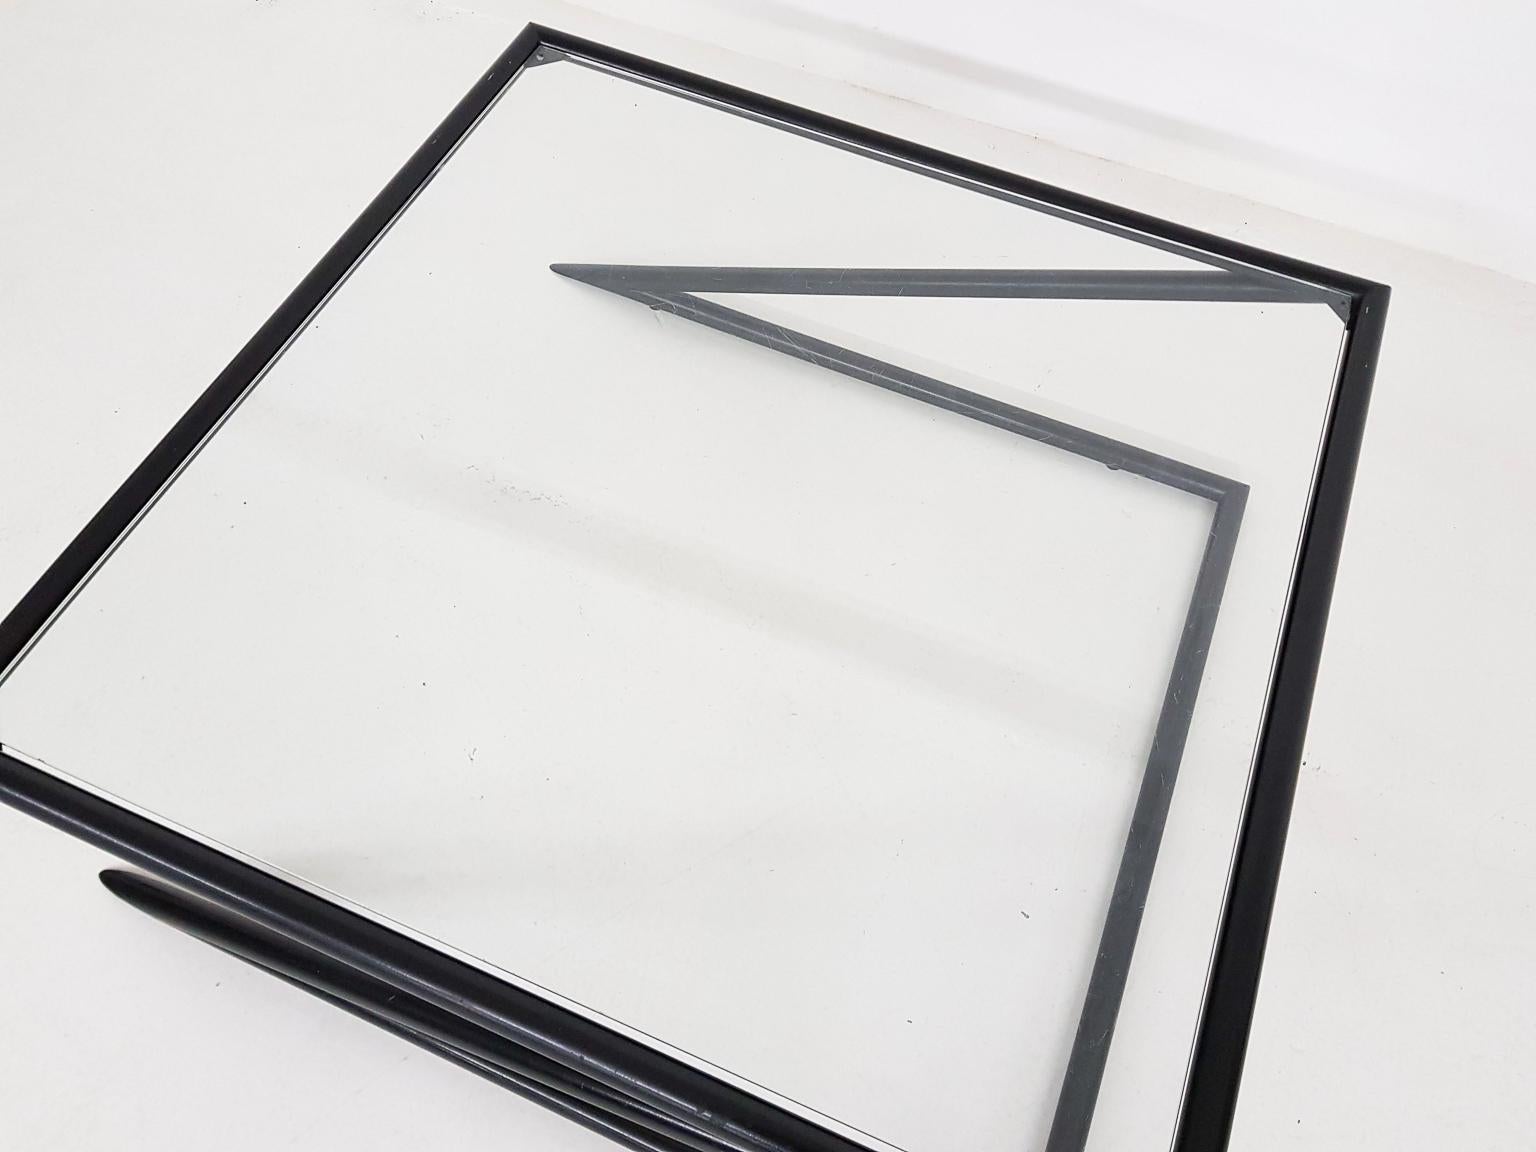 Late 20th Century Geometric Glass and Metal “Z” Coffee Table by Harvink, the Netherlands, 1980s